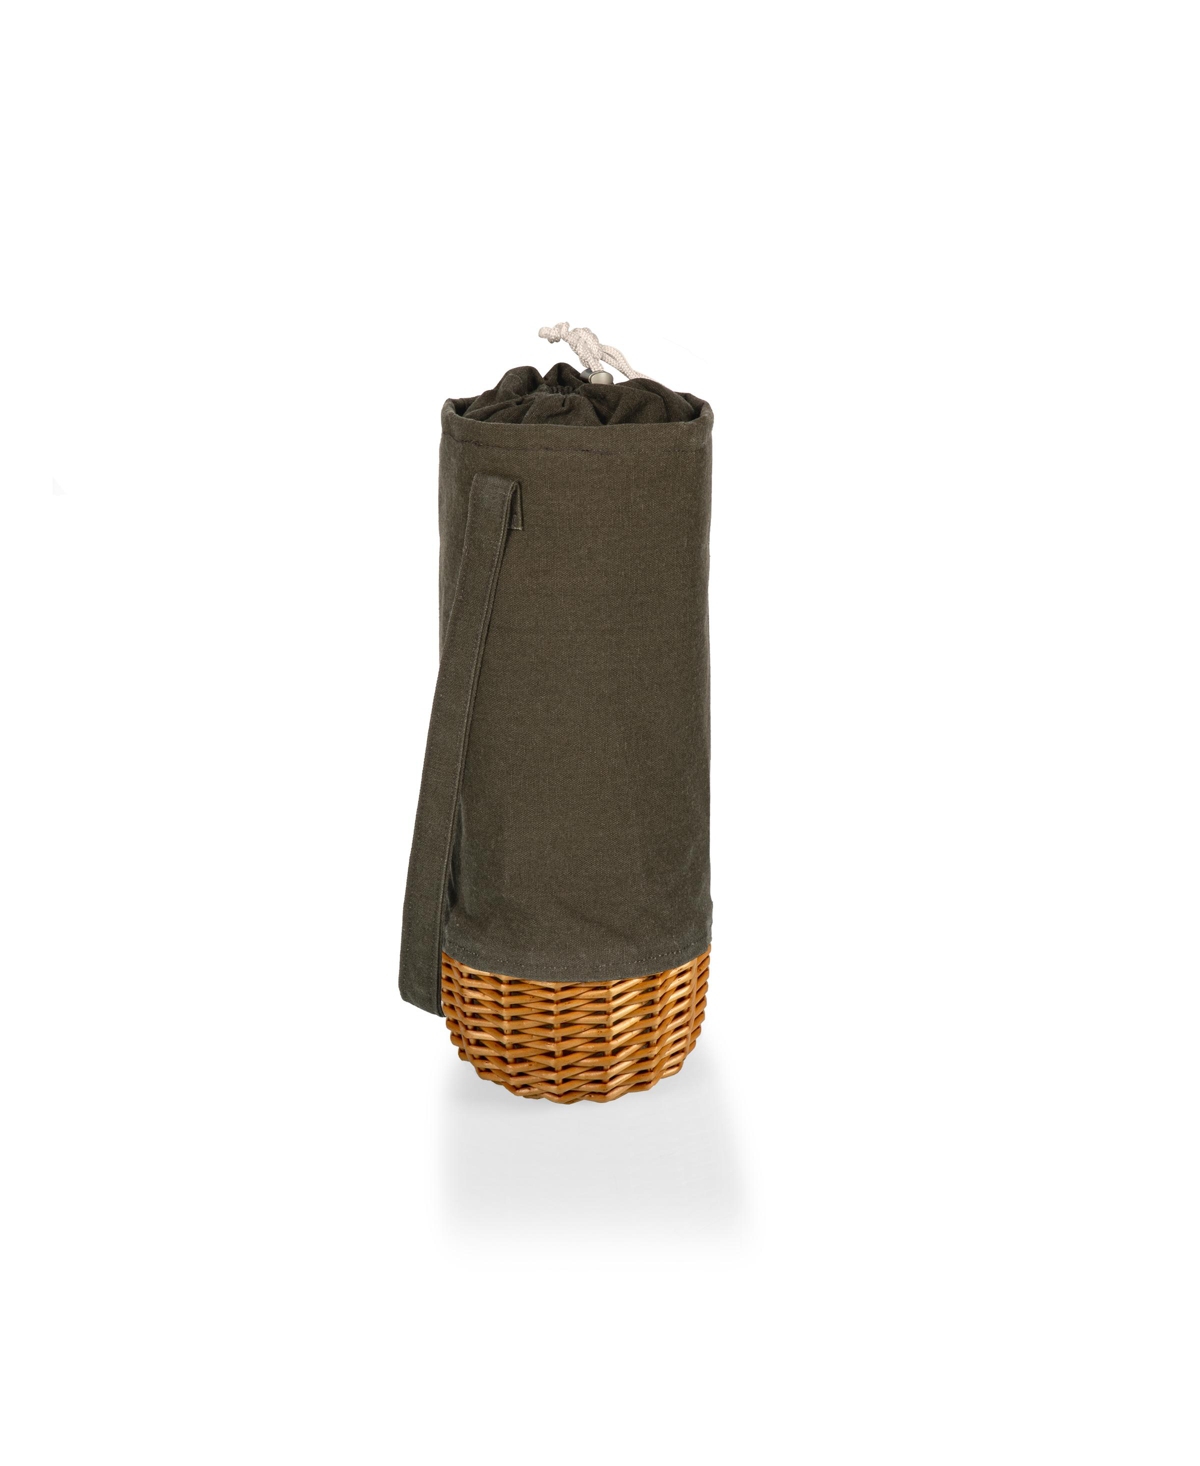 Malbec Insulated Canvas and Willow Wine Bottle Basket - Khaki Green